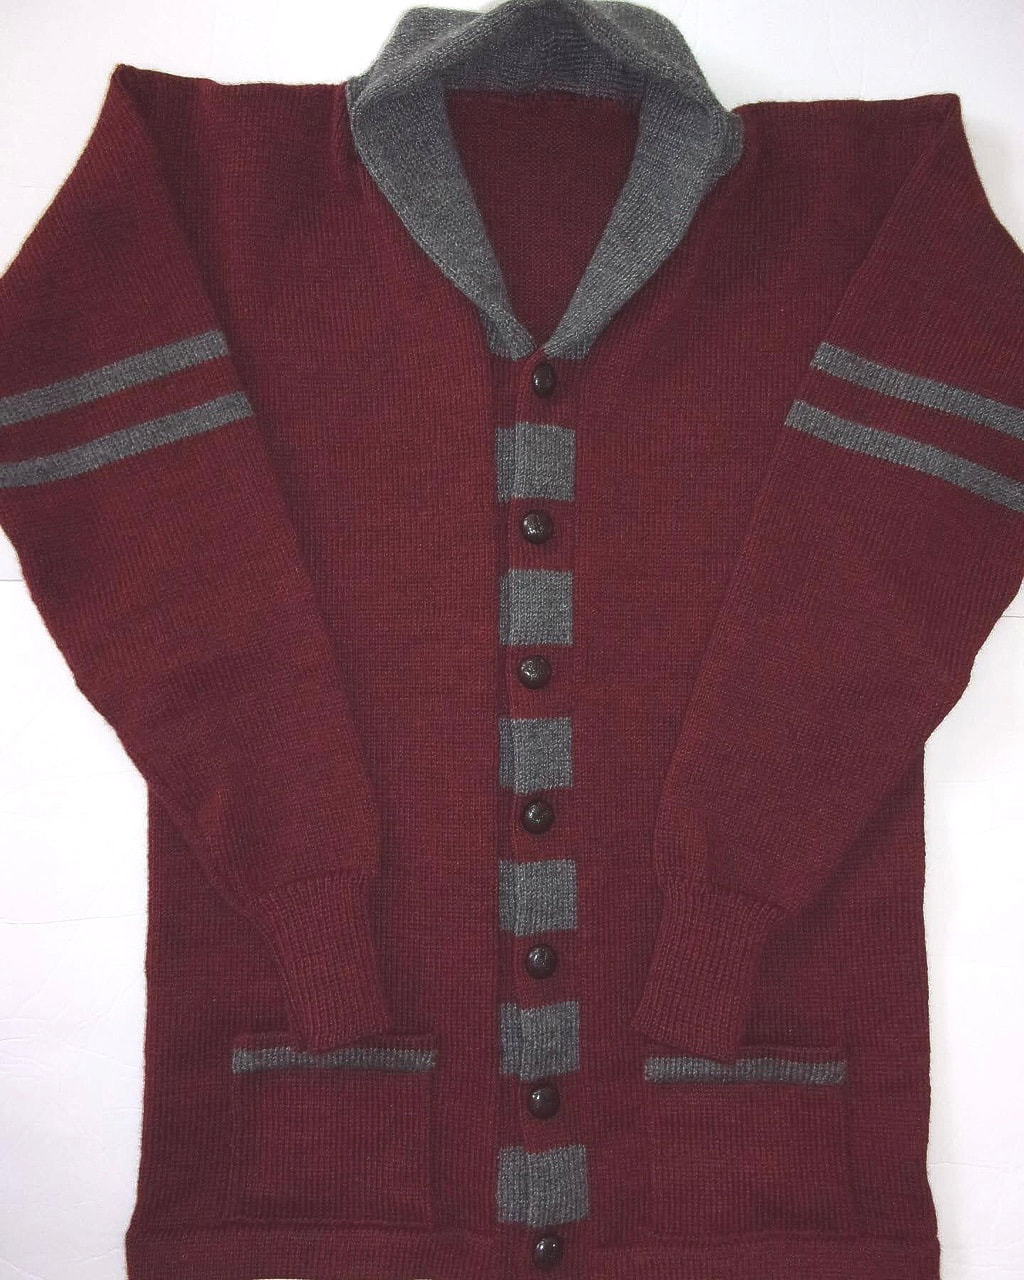 WWI Great War knitted college sweater. 